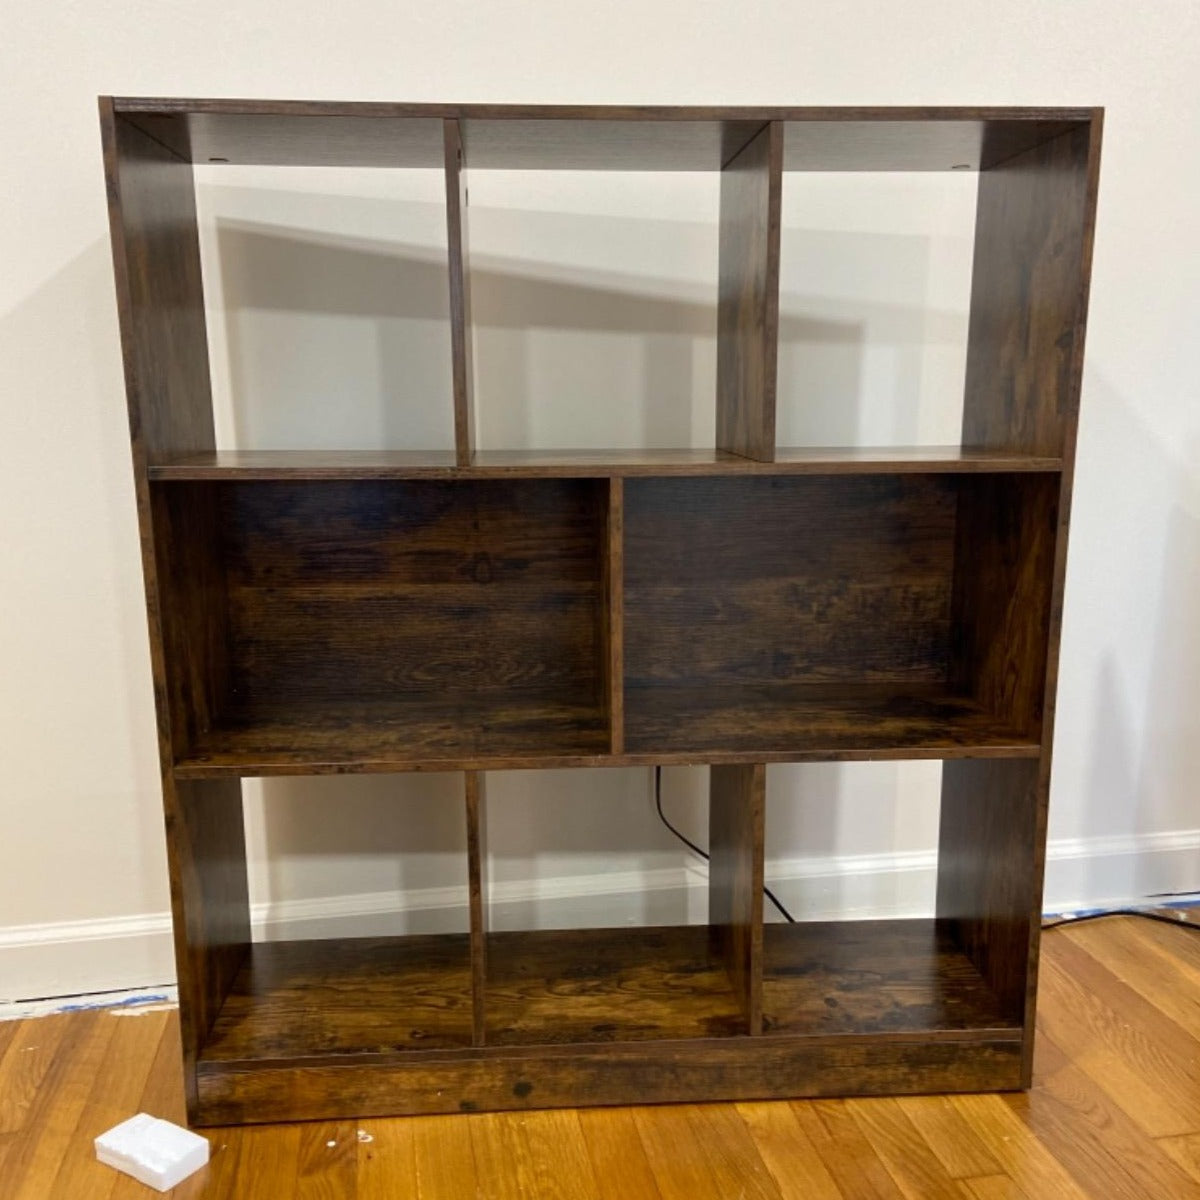 Brown Wooden Bookcase with Open Shelves - HWLEXTRA